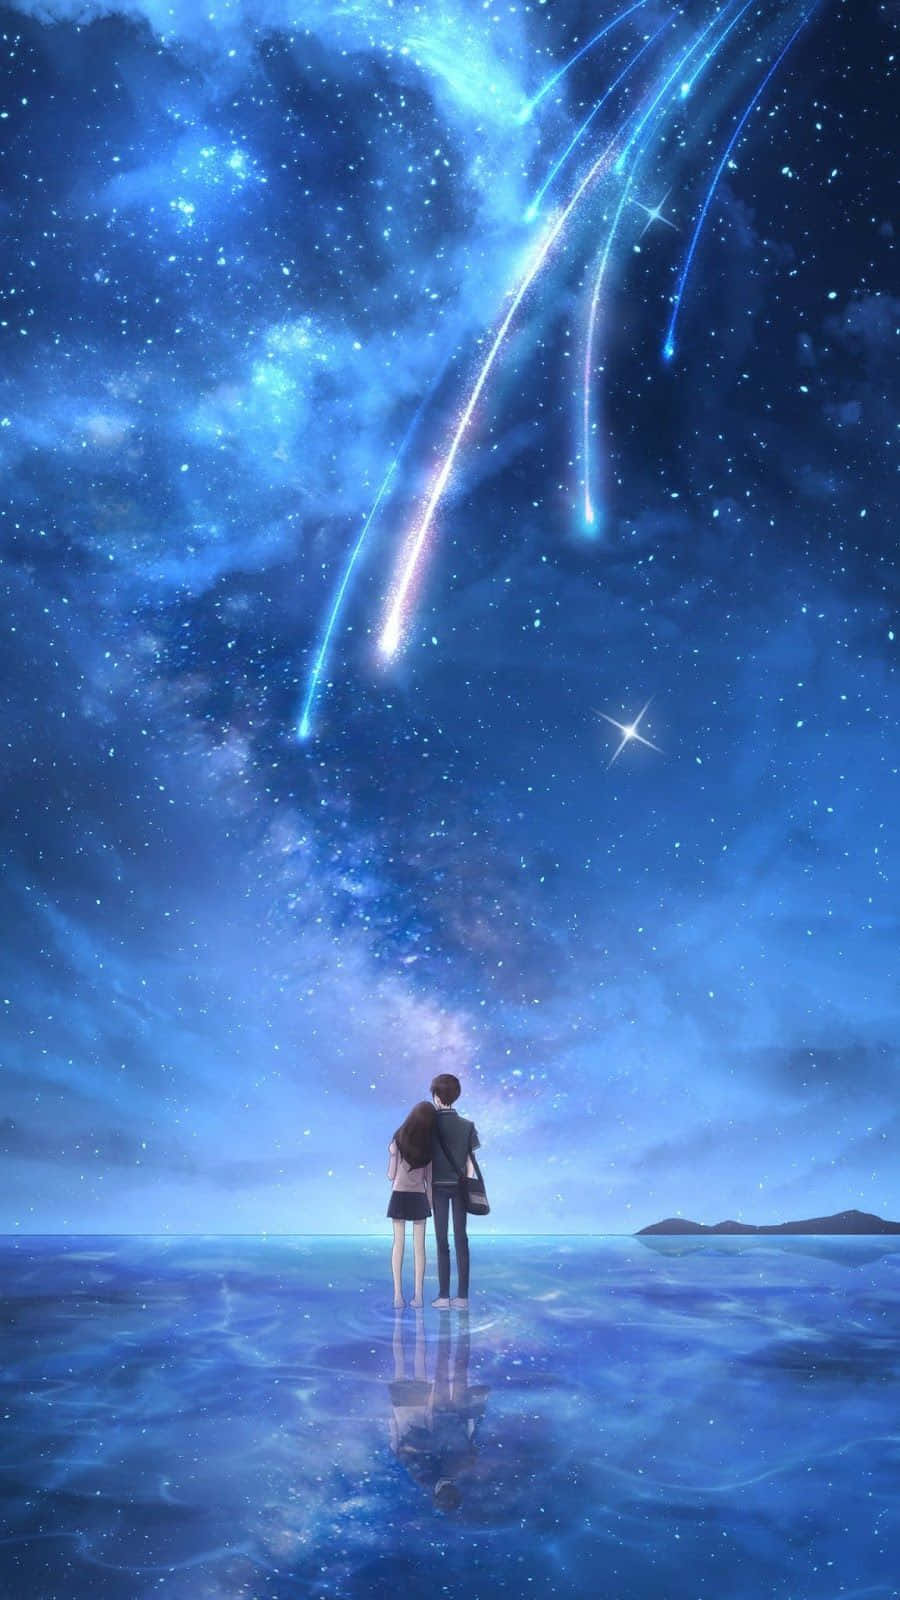 Magical Night Sky With Couple With Many Shooting Stars